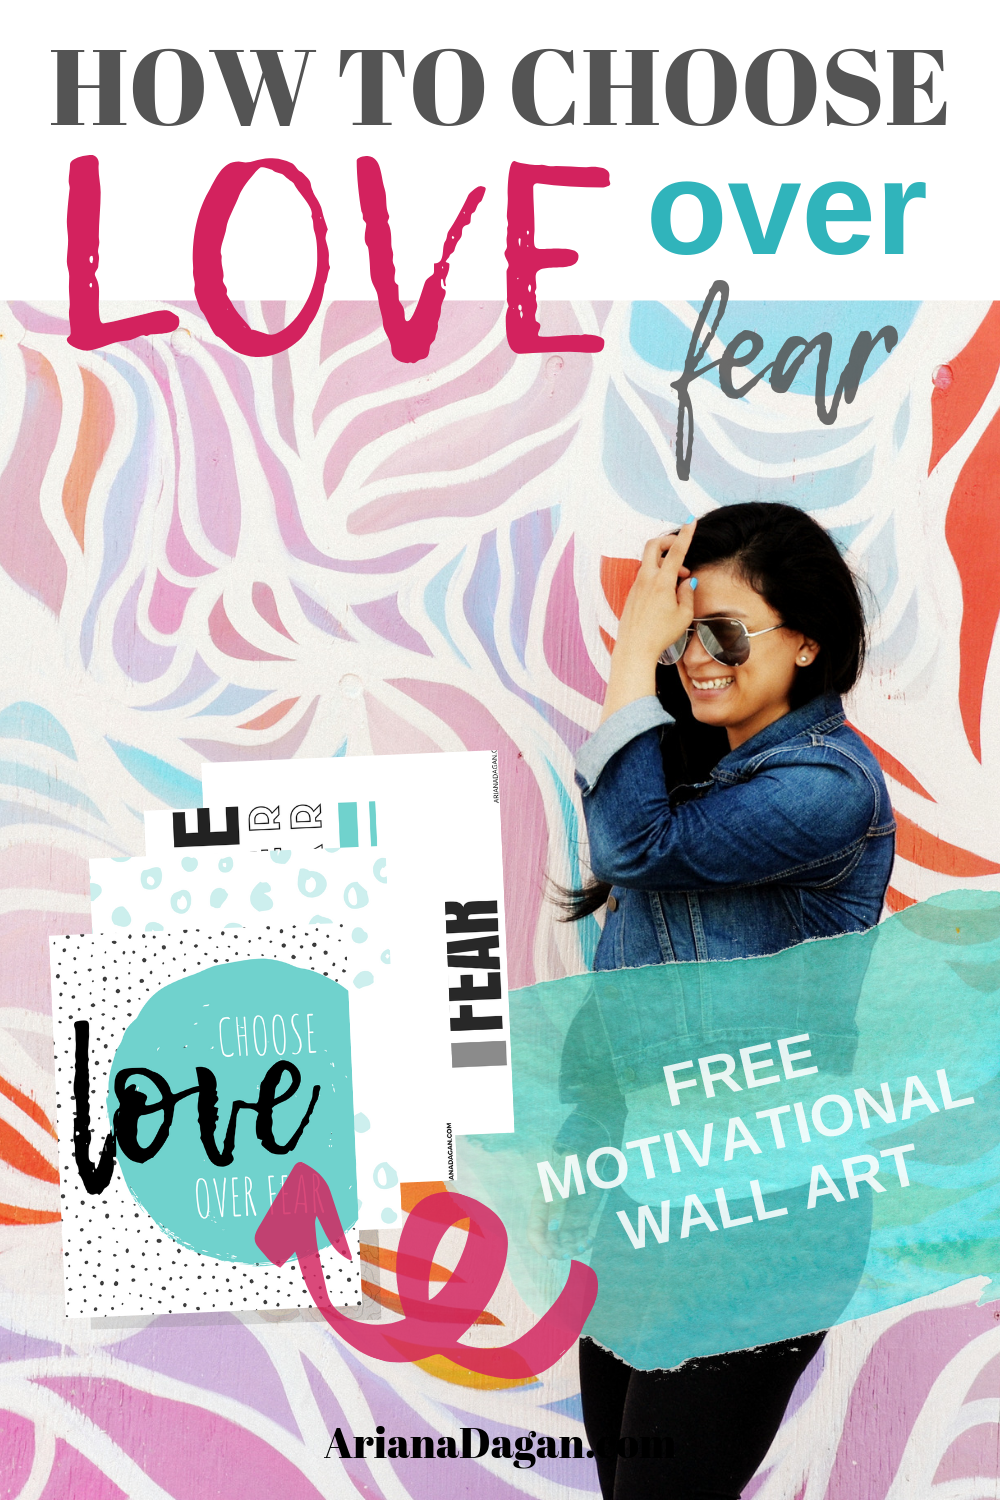 4 Easy Ways to Choose Love Over Fear Today + FREE Printable Motivational Wall Art for Your Home